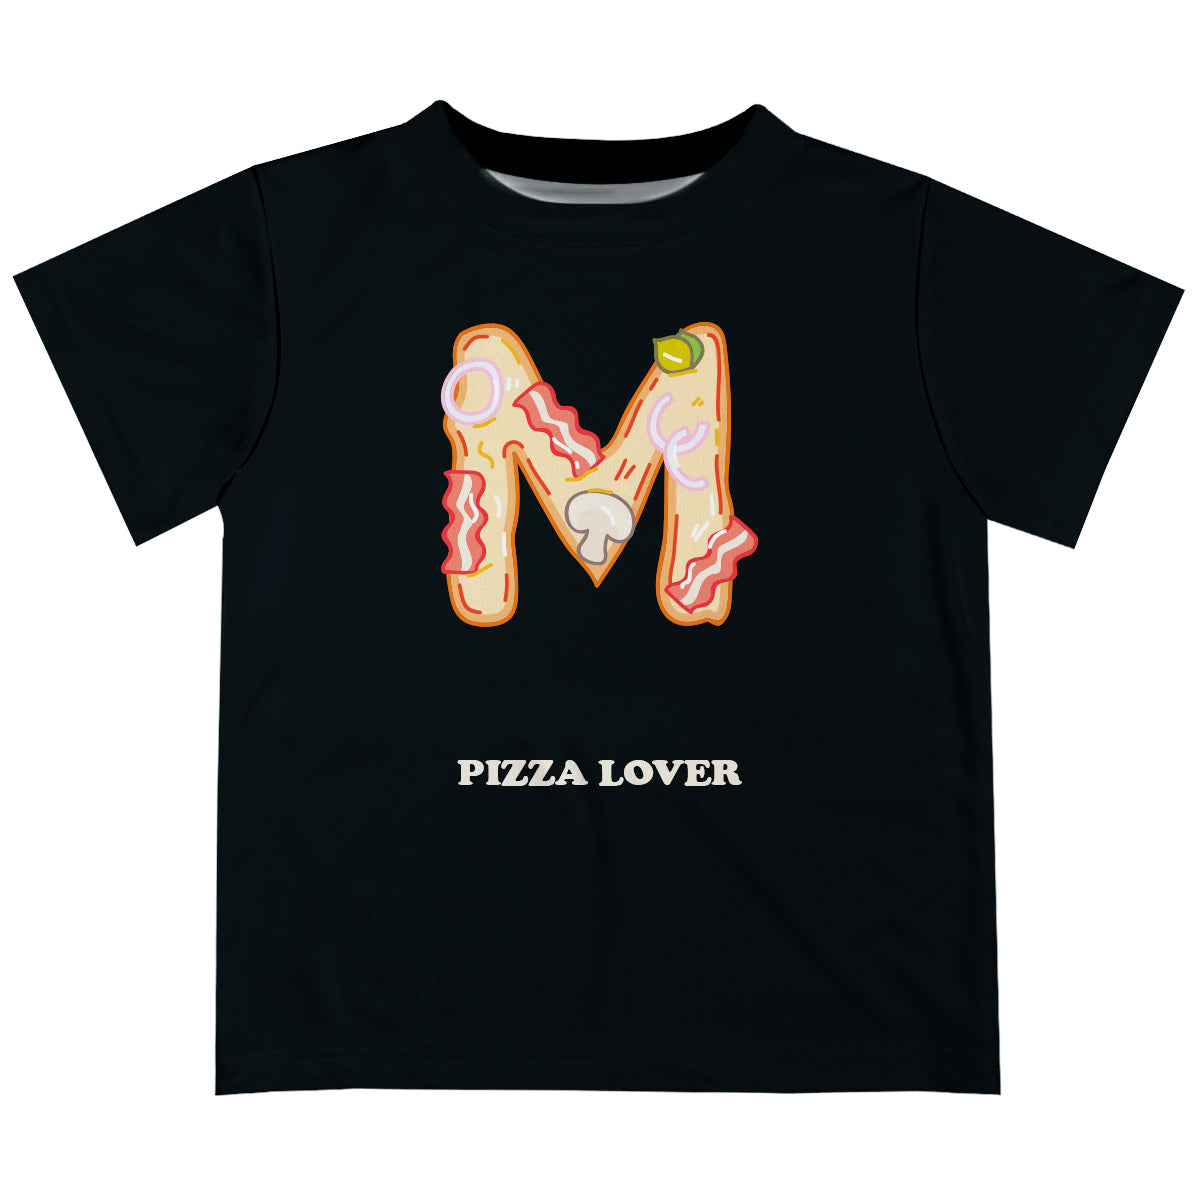 Pizza Lover Initial and Name Black Short Sleeve Tee Shirt - Wimziy&Co.